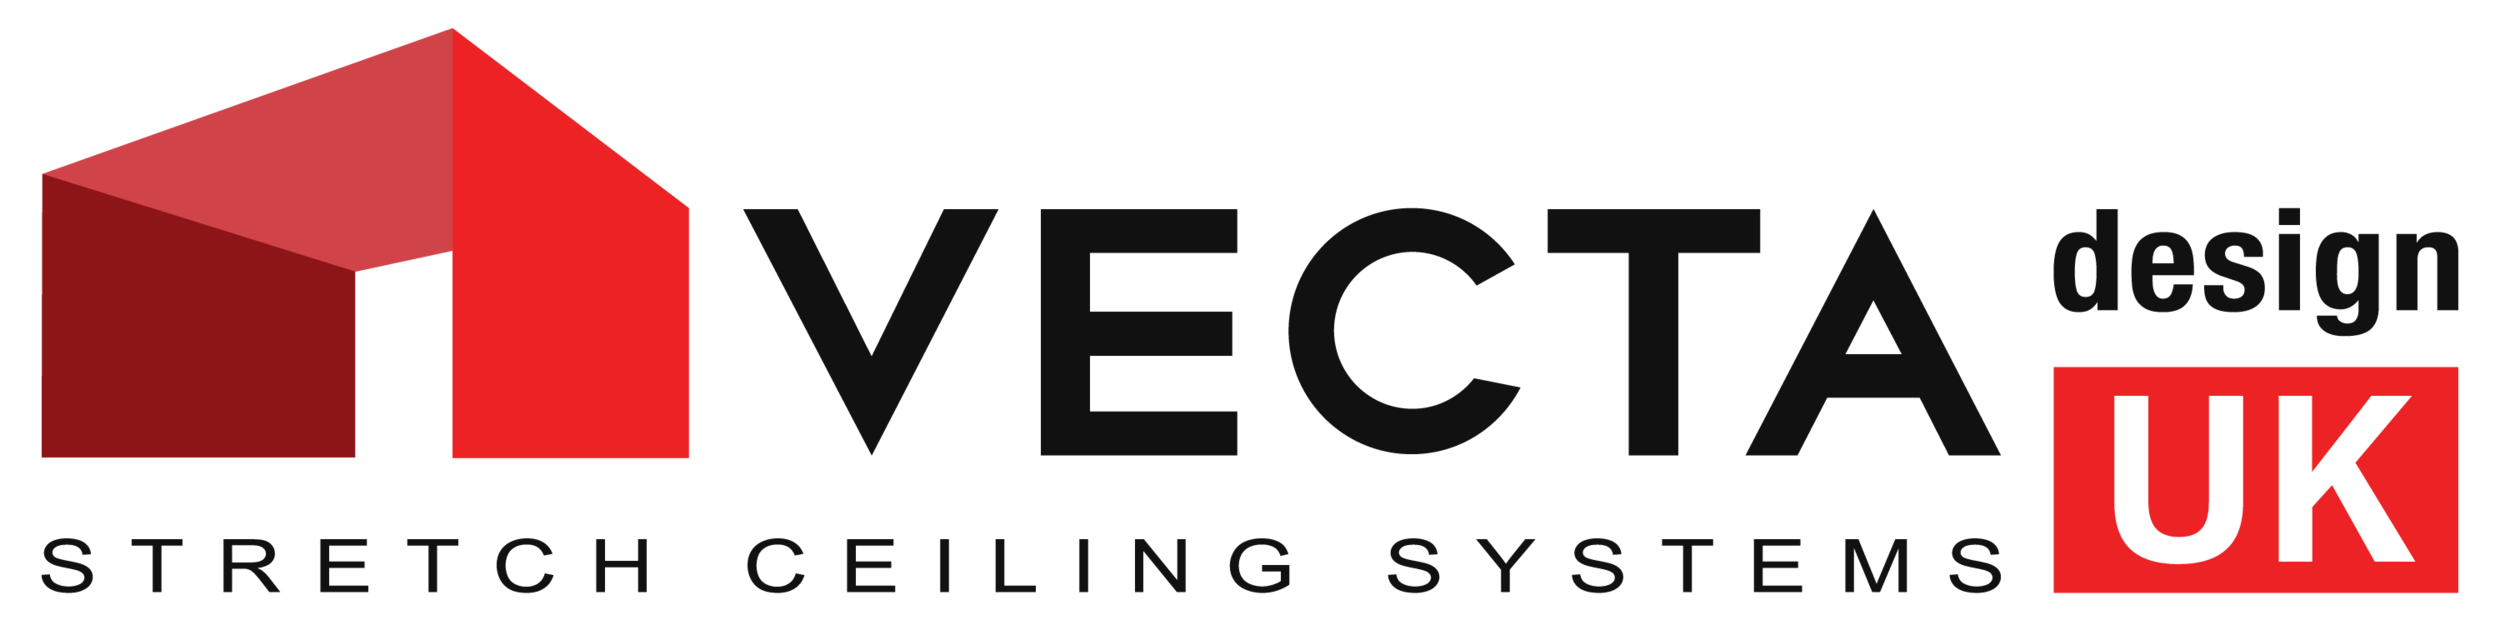 Vecta Design UK | Stretch Ceiling Systems